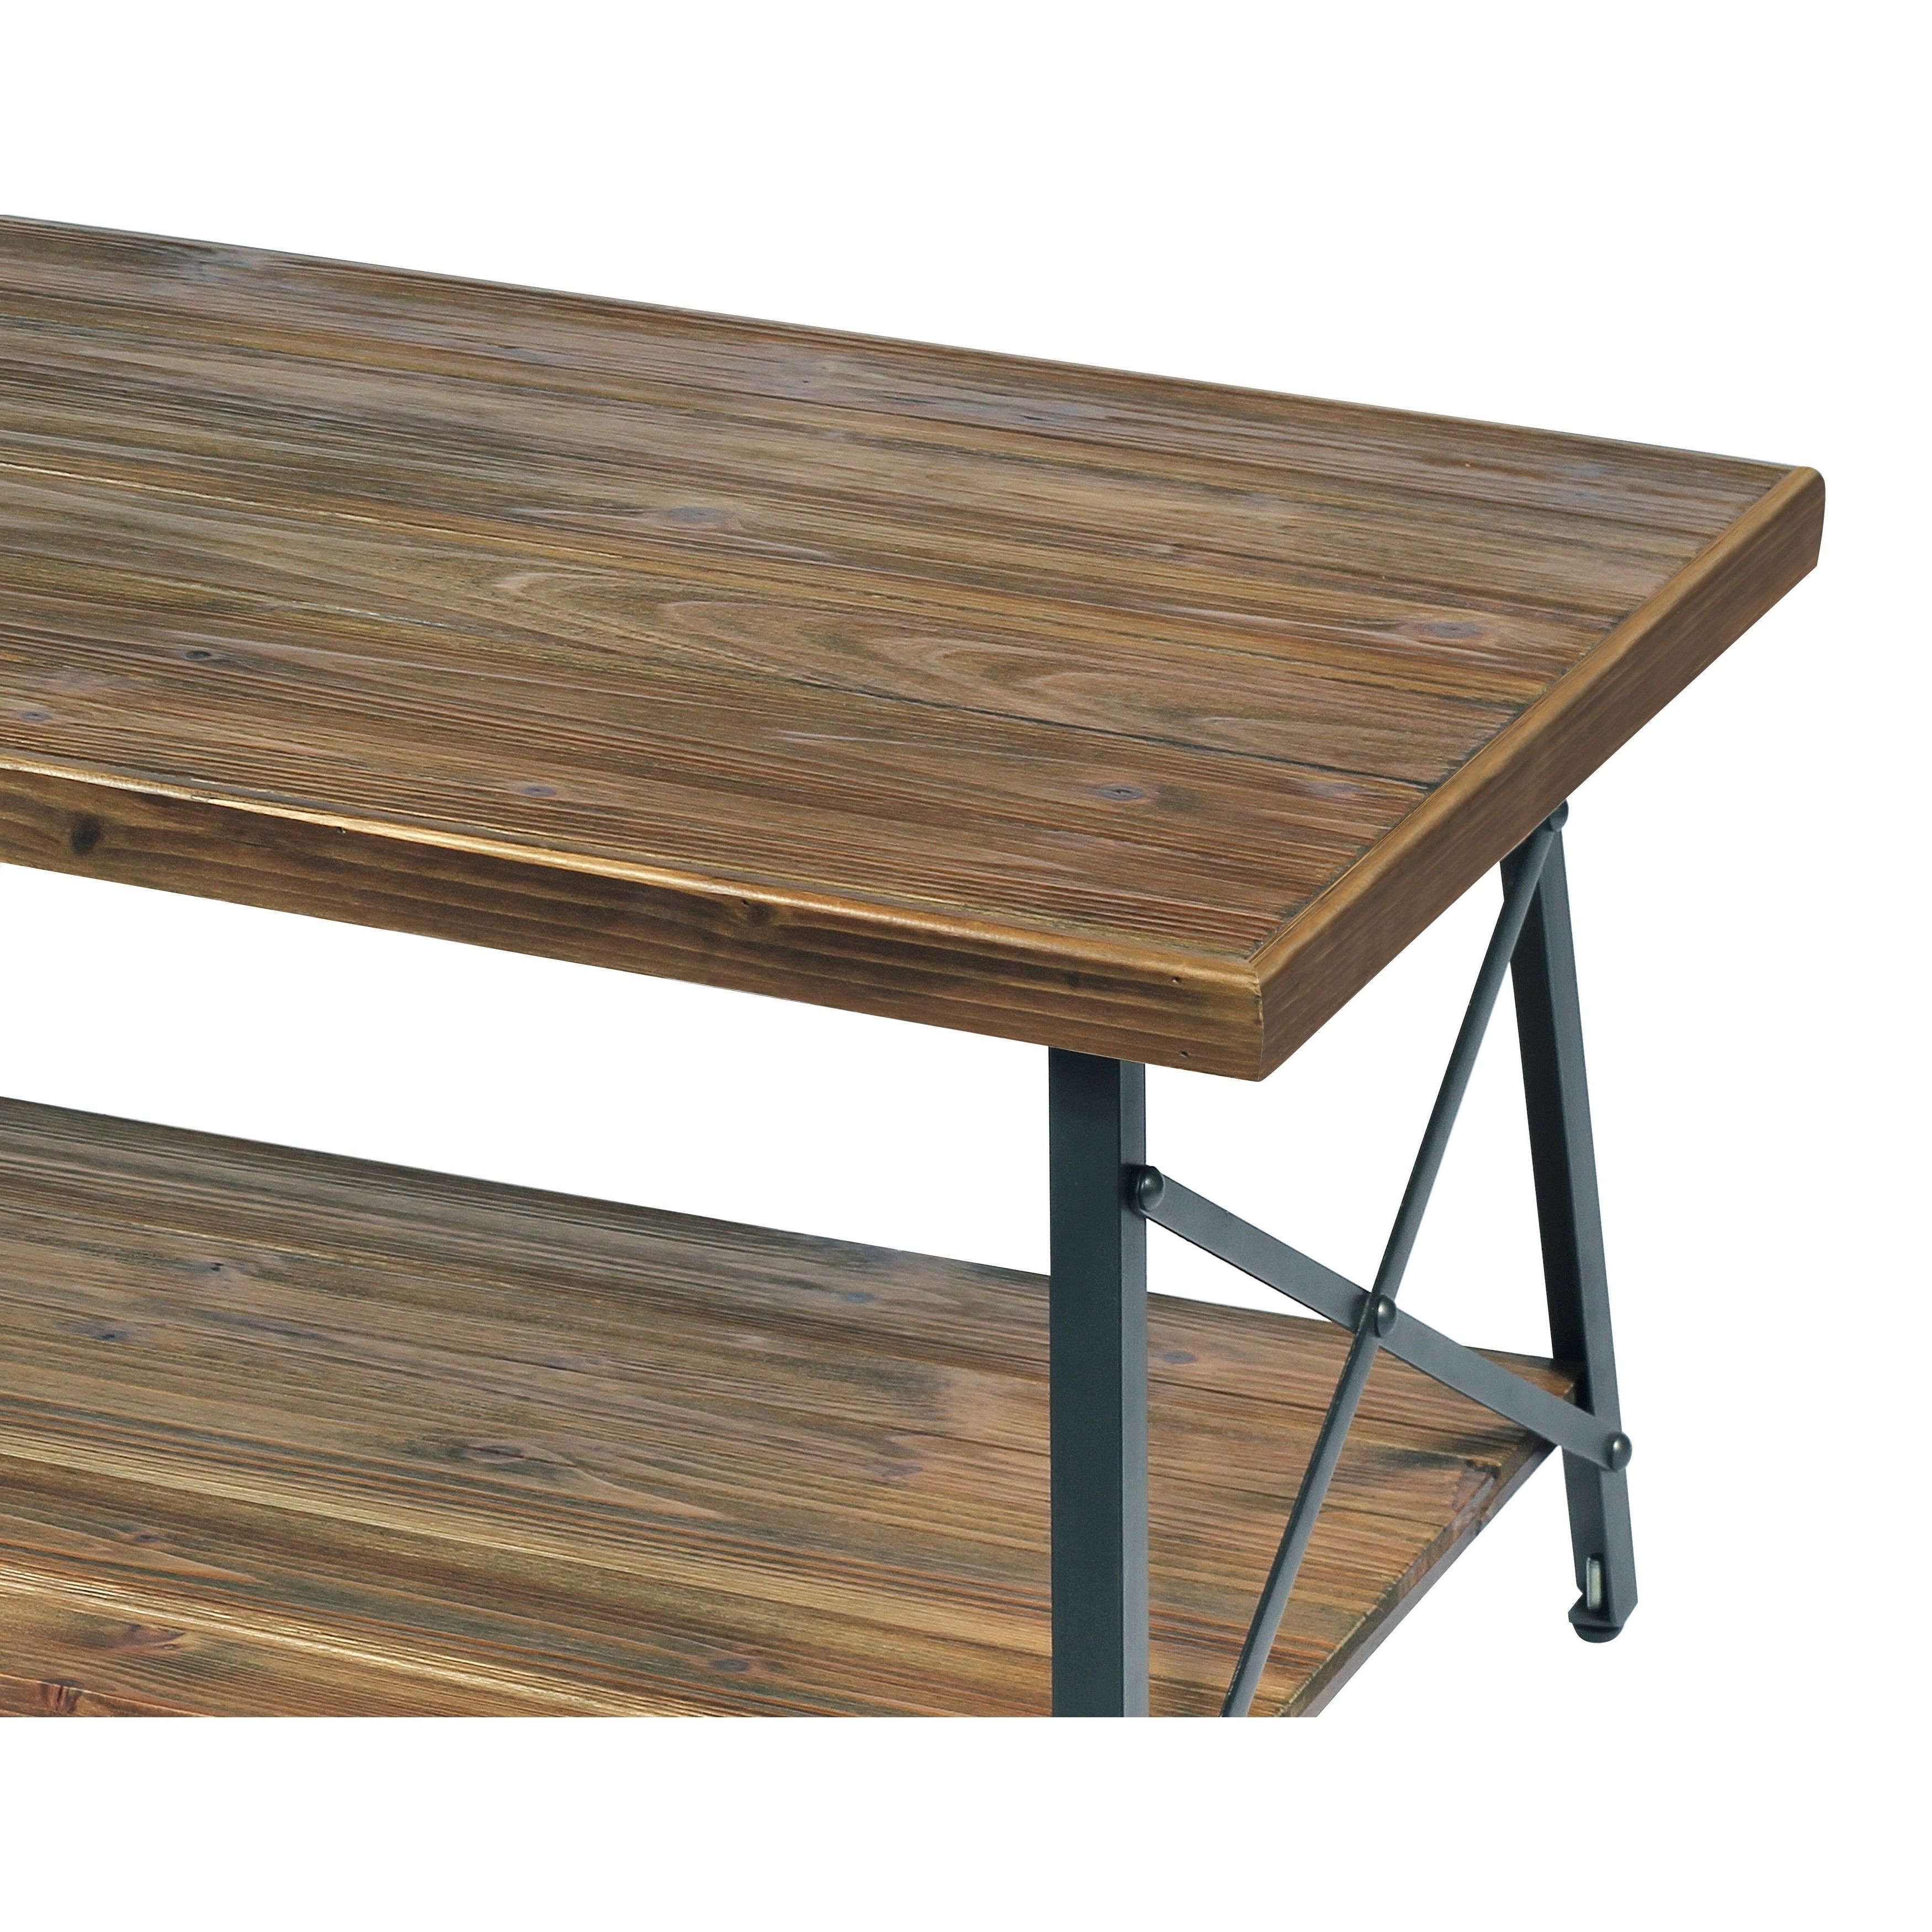 Well Known Carbon Loft Oliver Modern Rustic Natural Fir Coffee Tables Regarding Carbon Loft Oliver Modern Rustic Natural Fir Coffee Table (View 6 of 20)